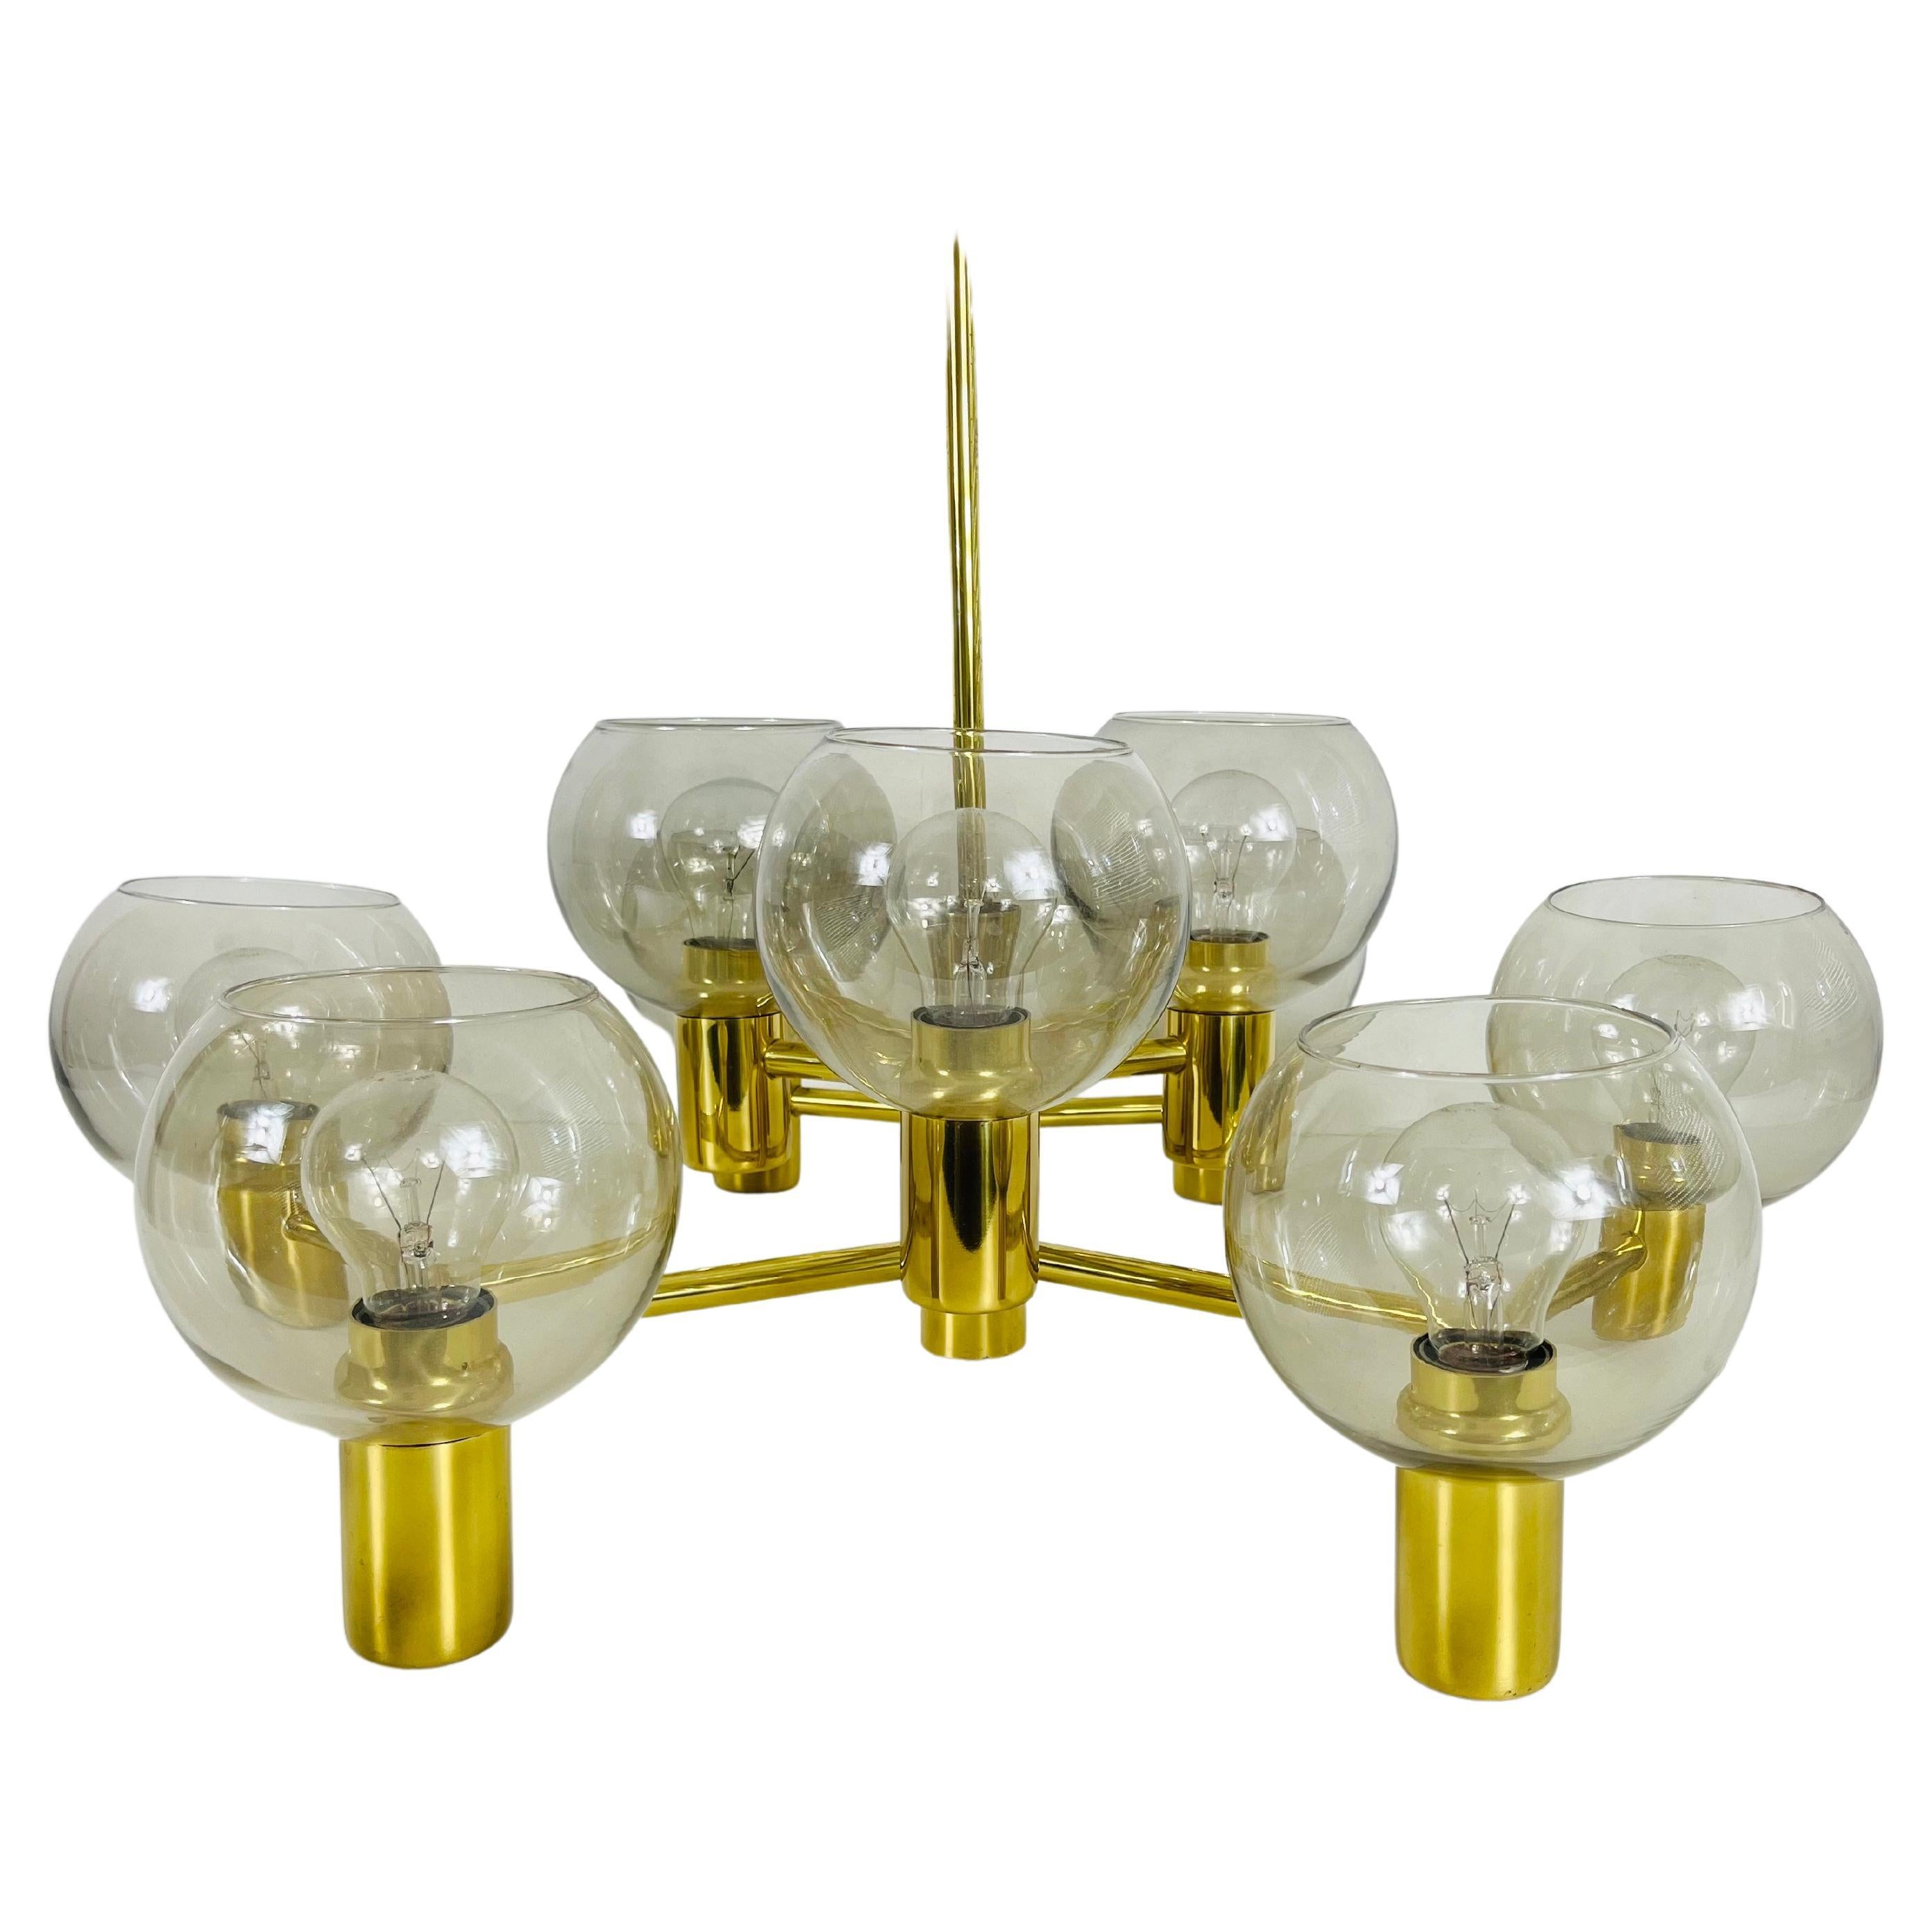 Monumental Swedish Mid-Century Modern Brass and Glass Chandelier, 1960s For Sale